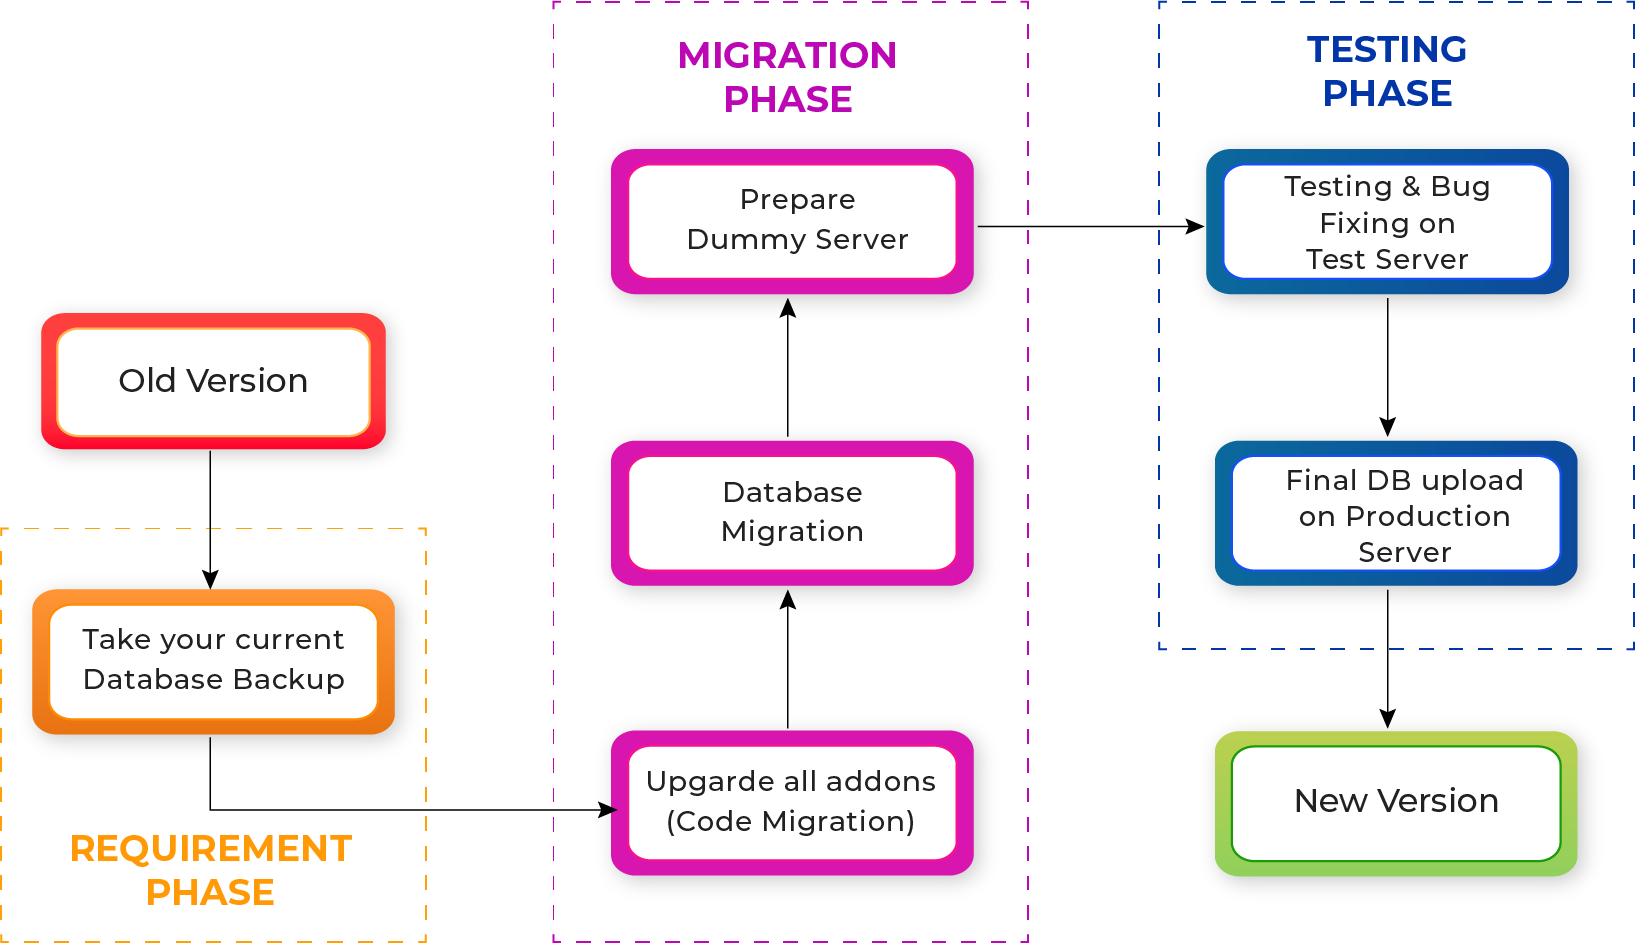 How to Migrate To New Versions